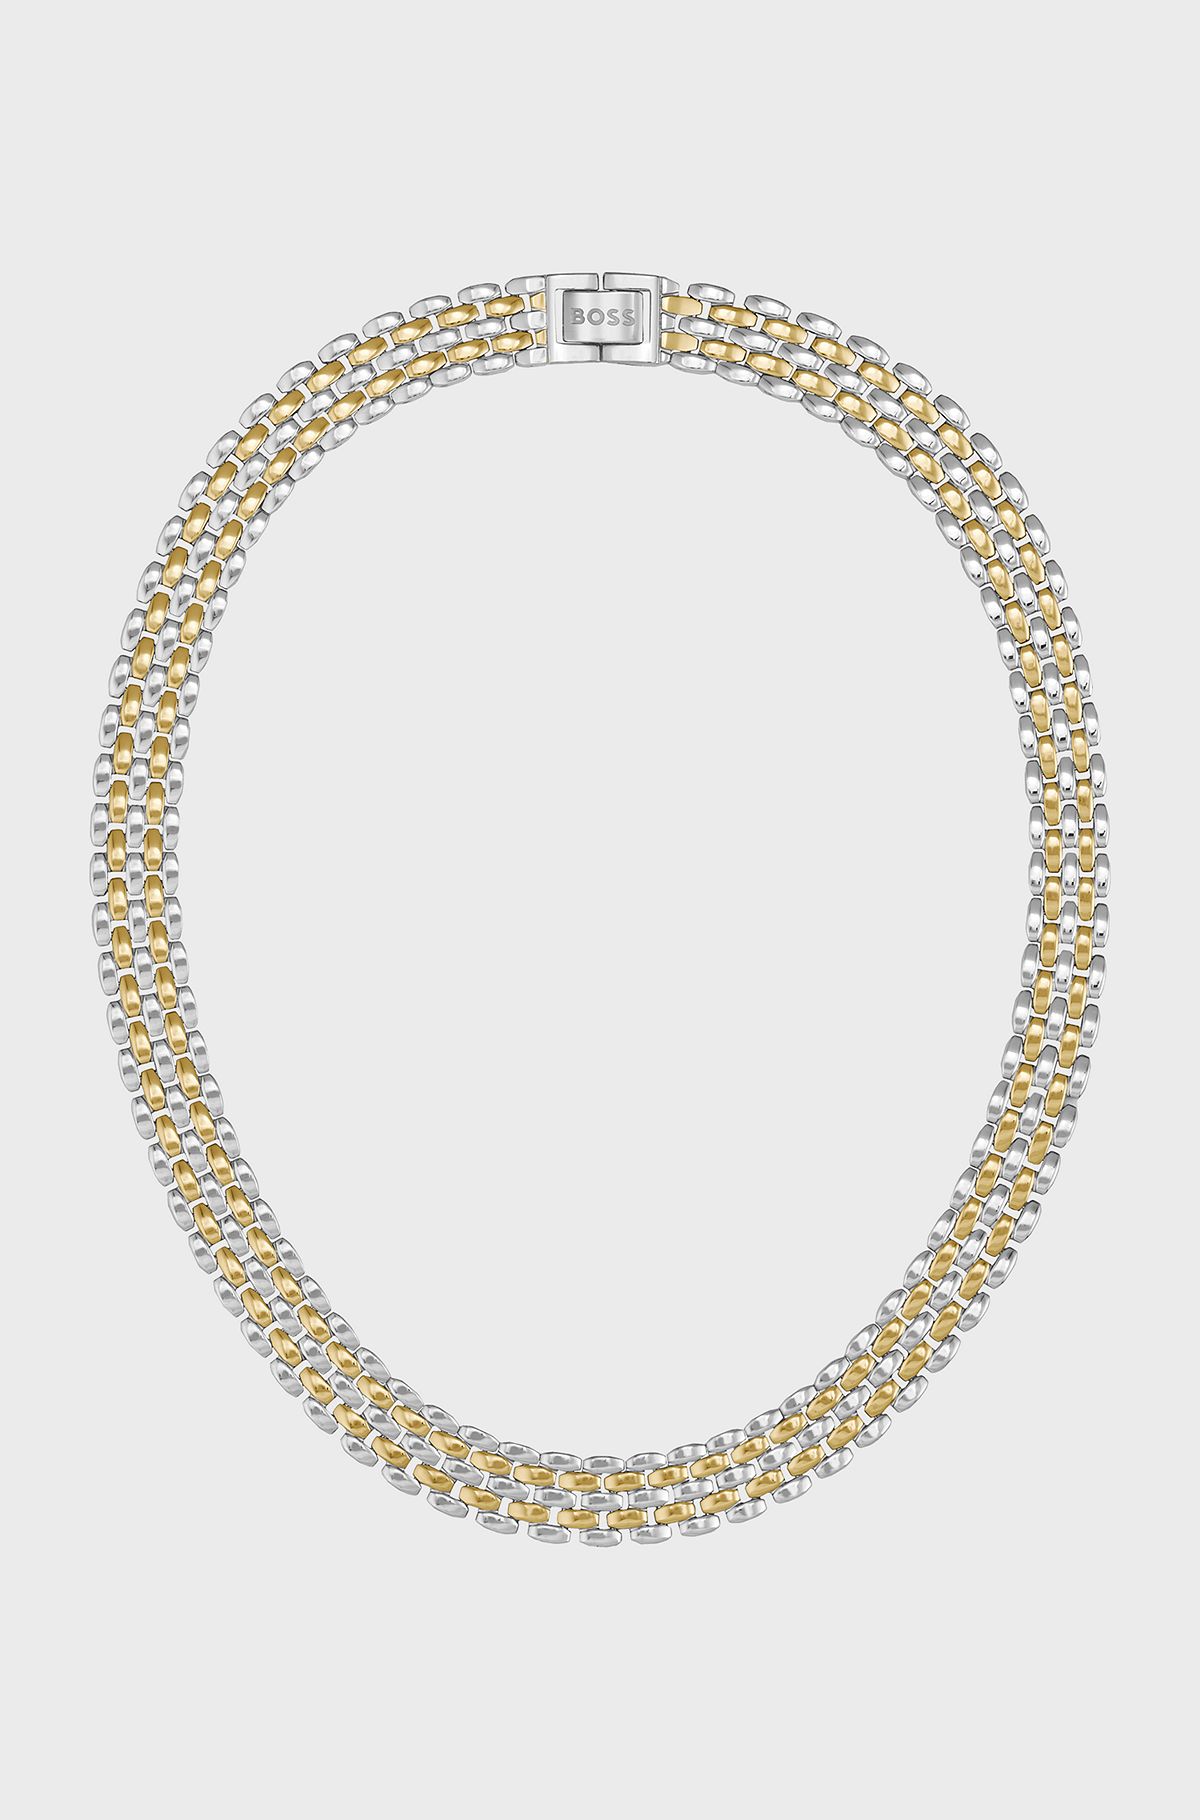 Multi-link necklace with two-tone design, Patterned